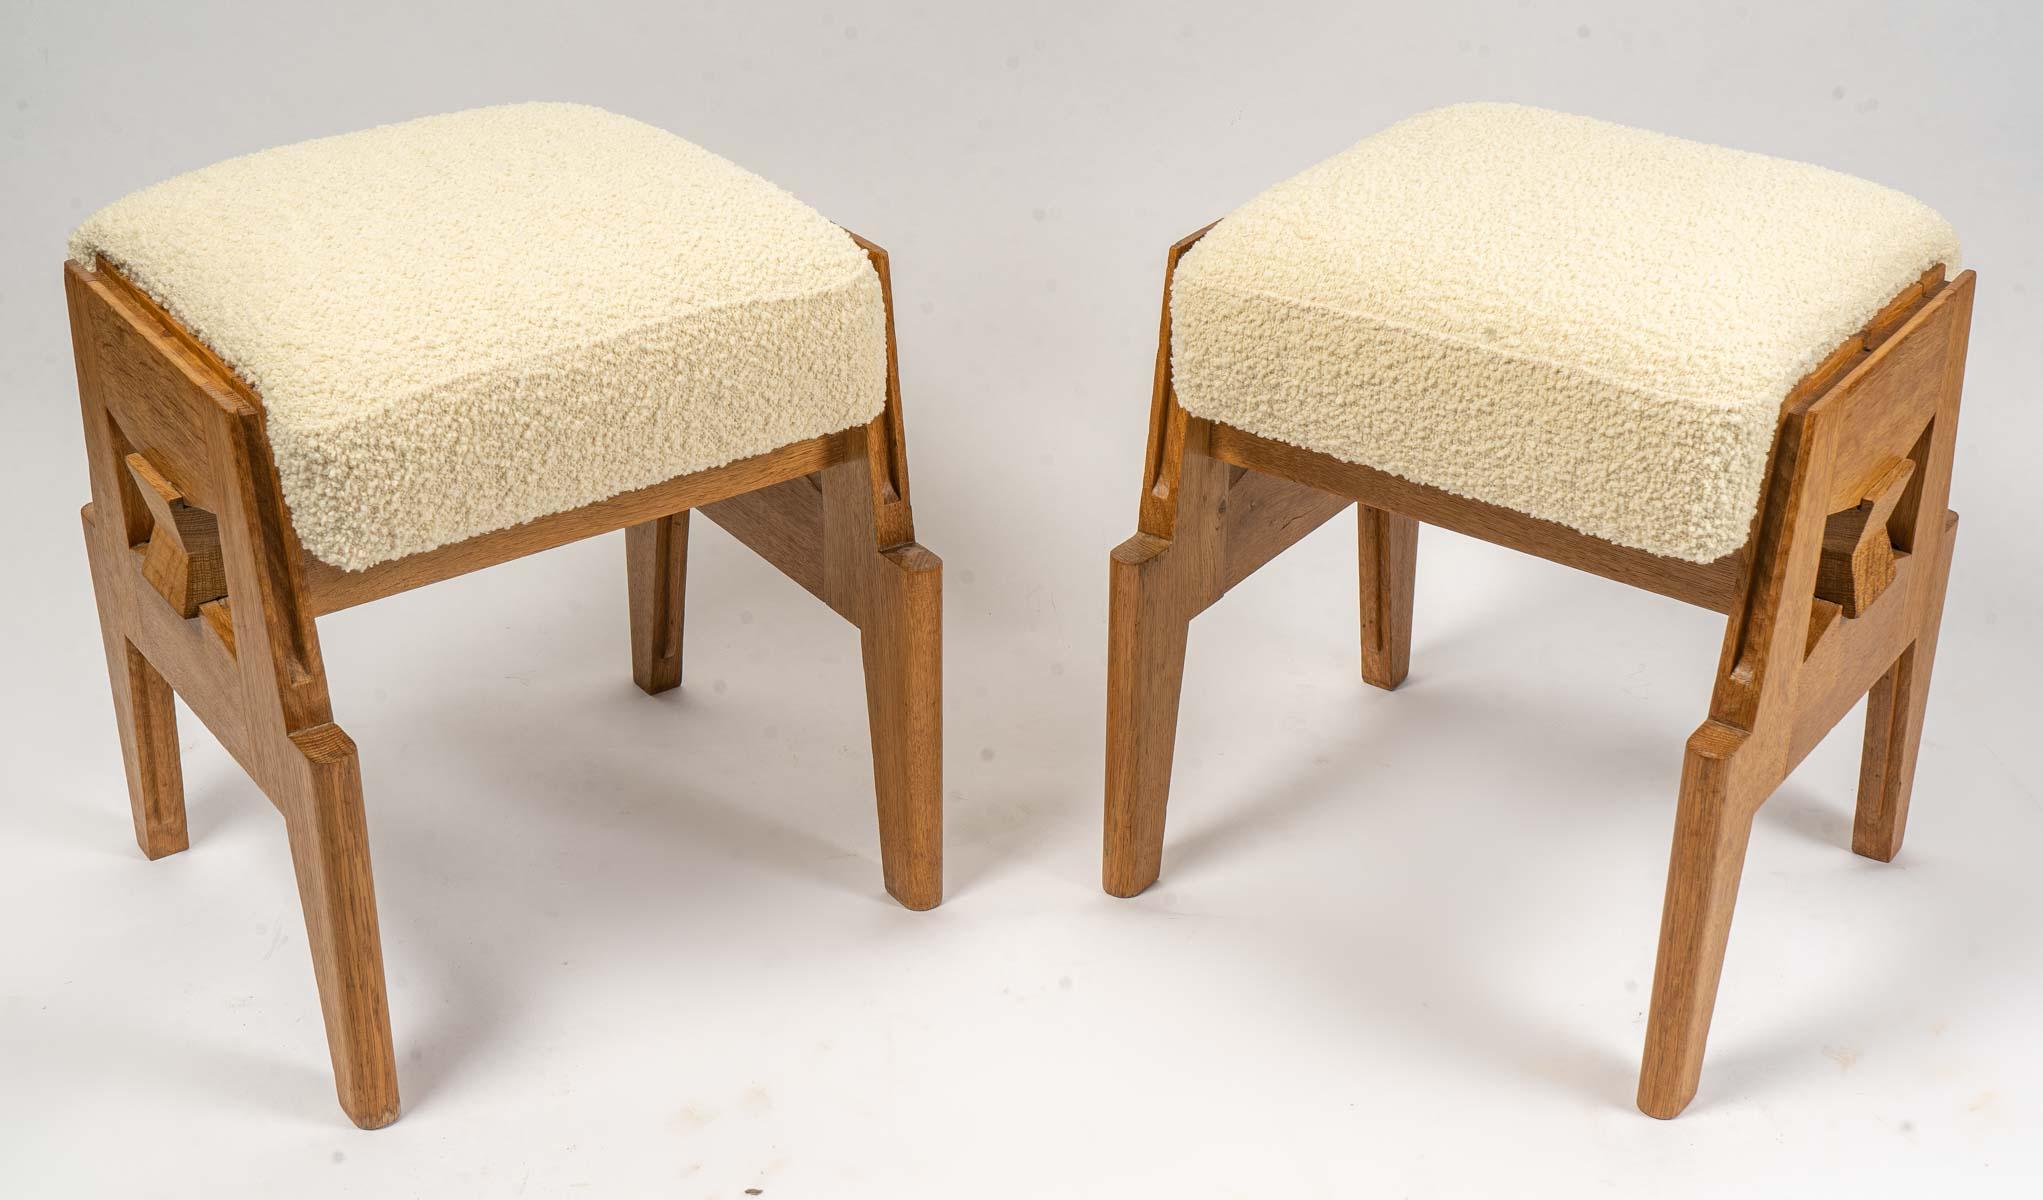 Pair of footrests Guillerme et Chambron
In light oak. The upholstery is made of white buckle and has been refurbished. Work from the 60's. Excellent condition. 
Measures: H: 45 cm, W: 40 cm, D: 38 cm.